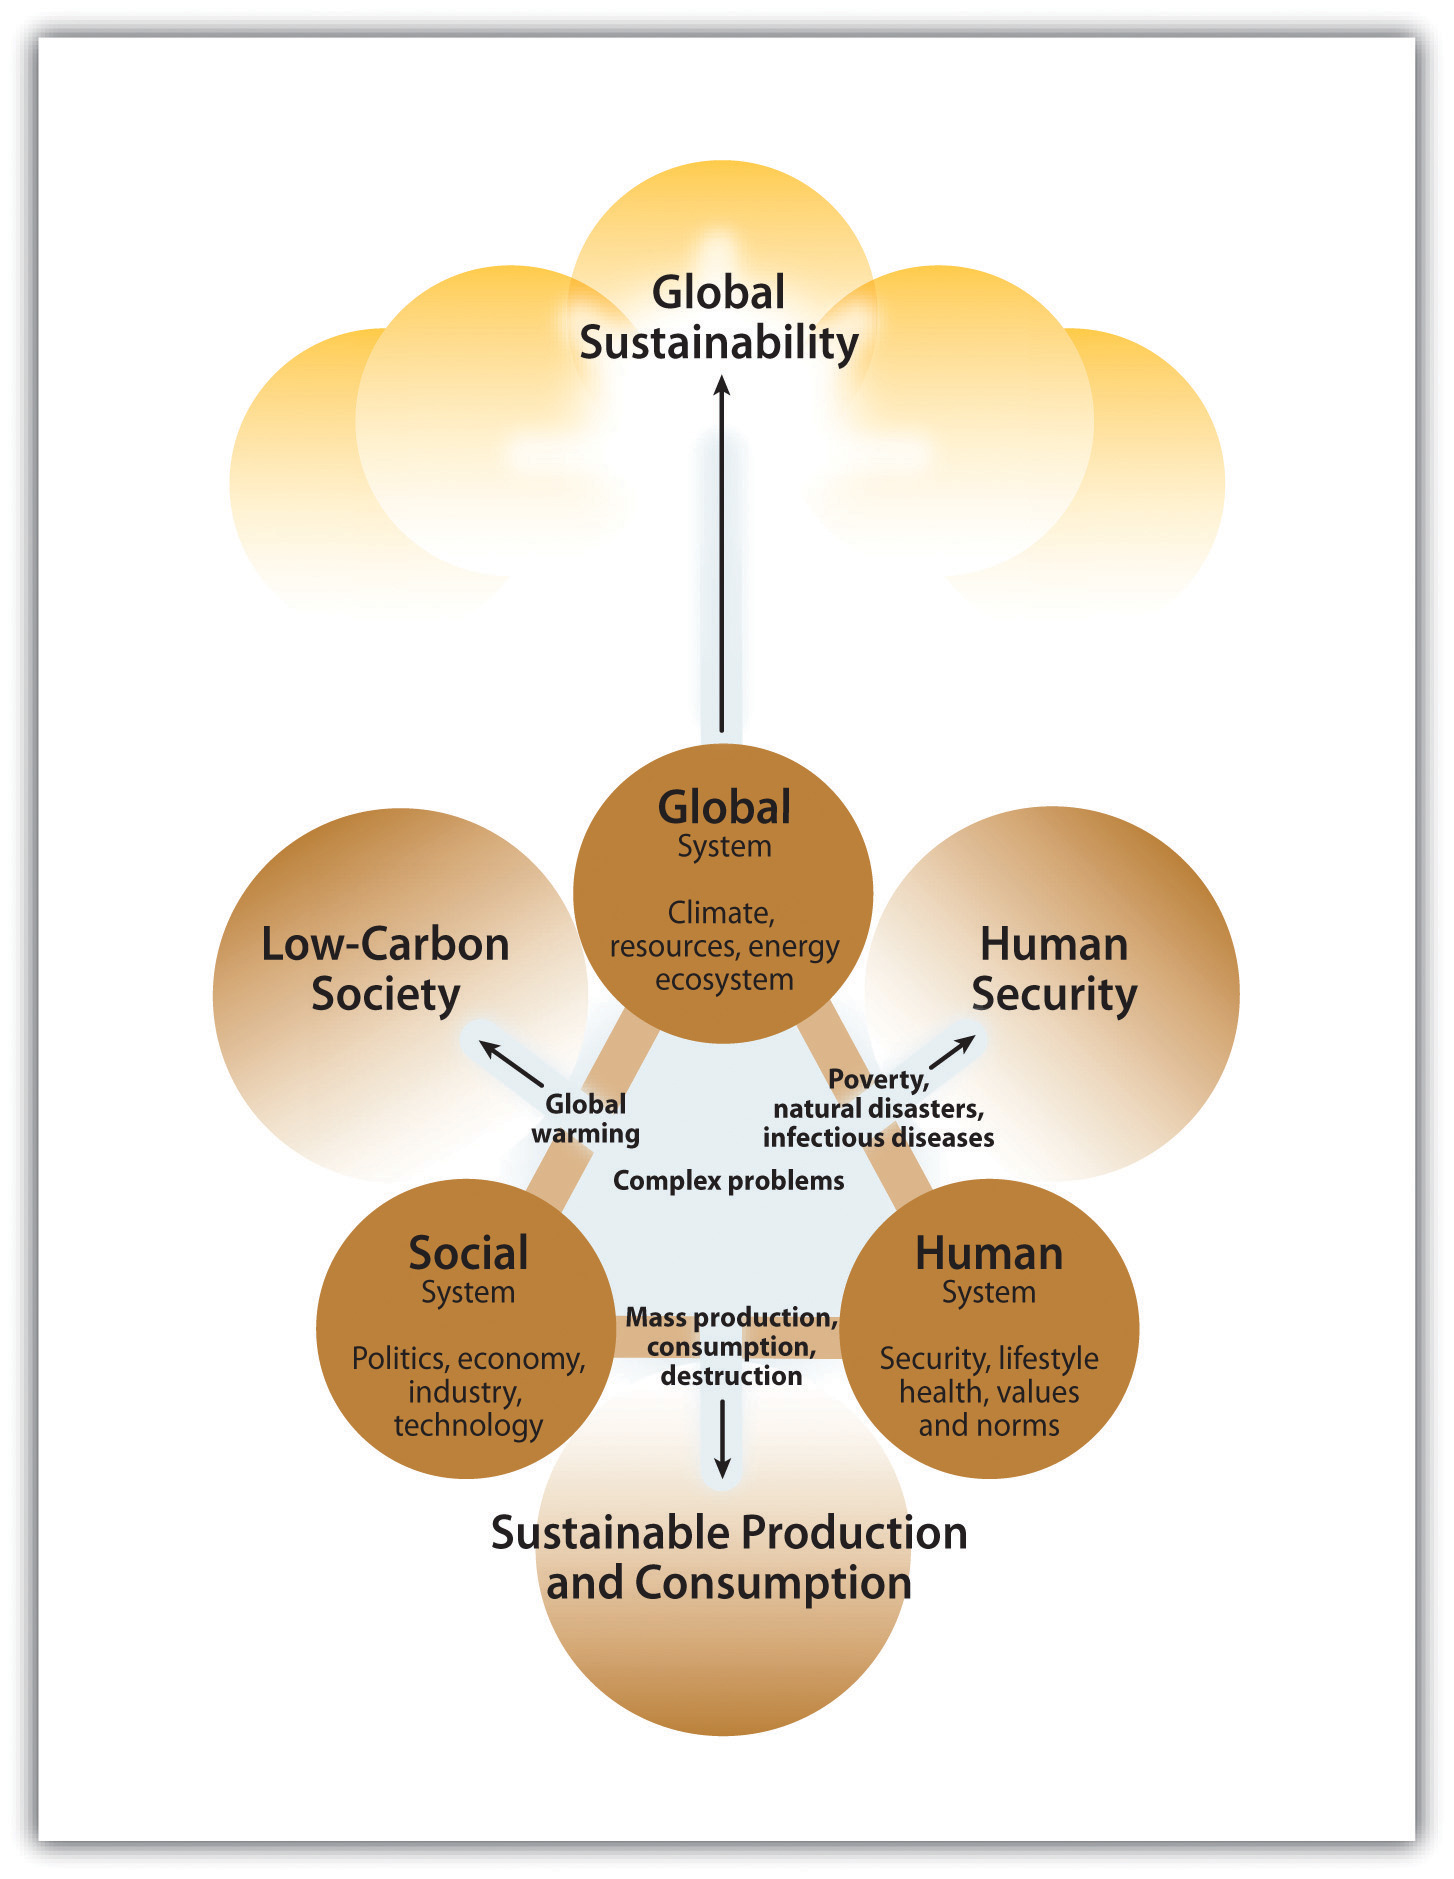 This shows the complex problems such as Social systems, Human systems, and Global systems working towards Global sustainability.